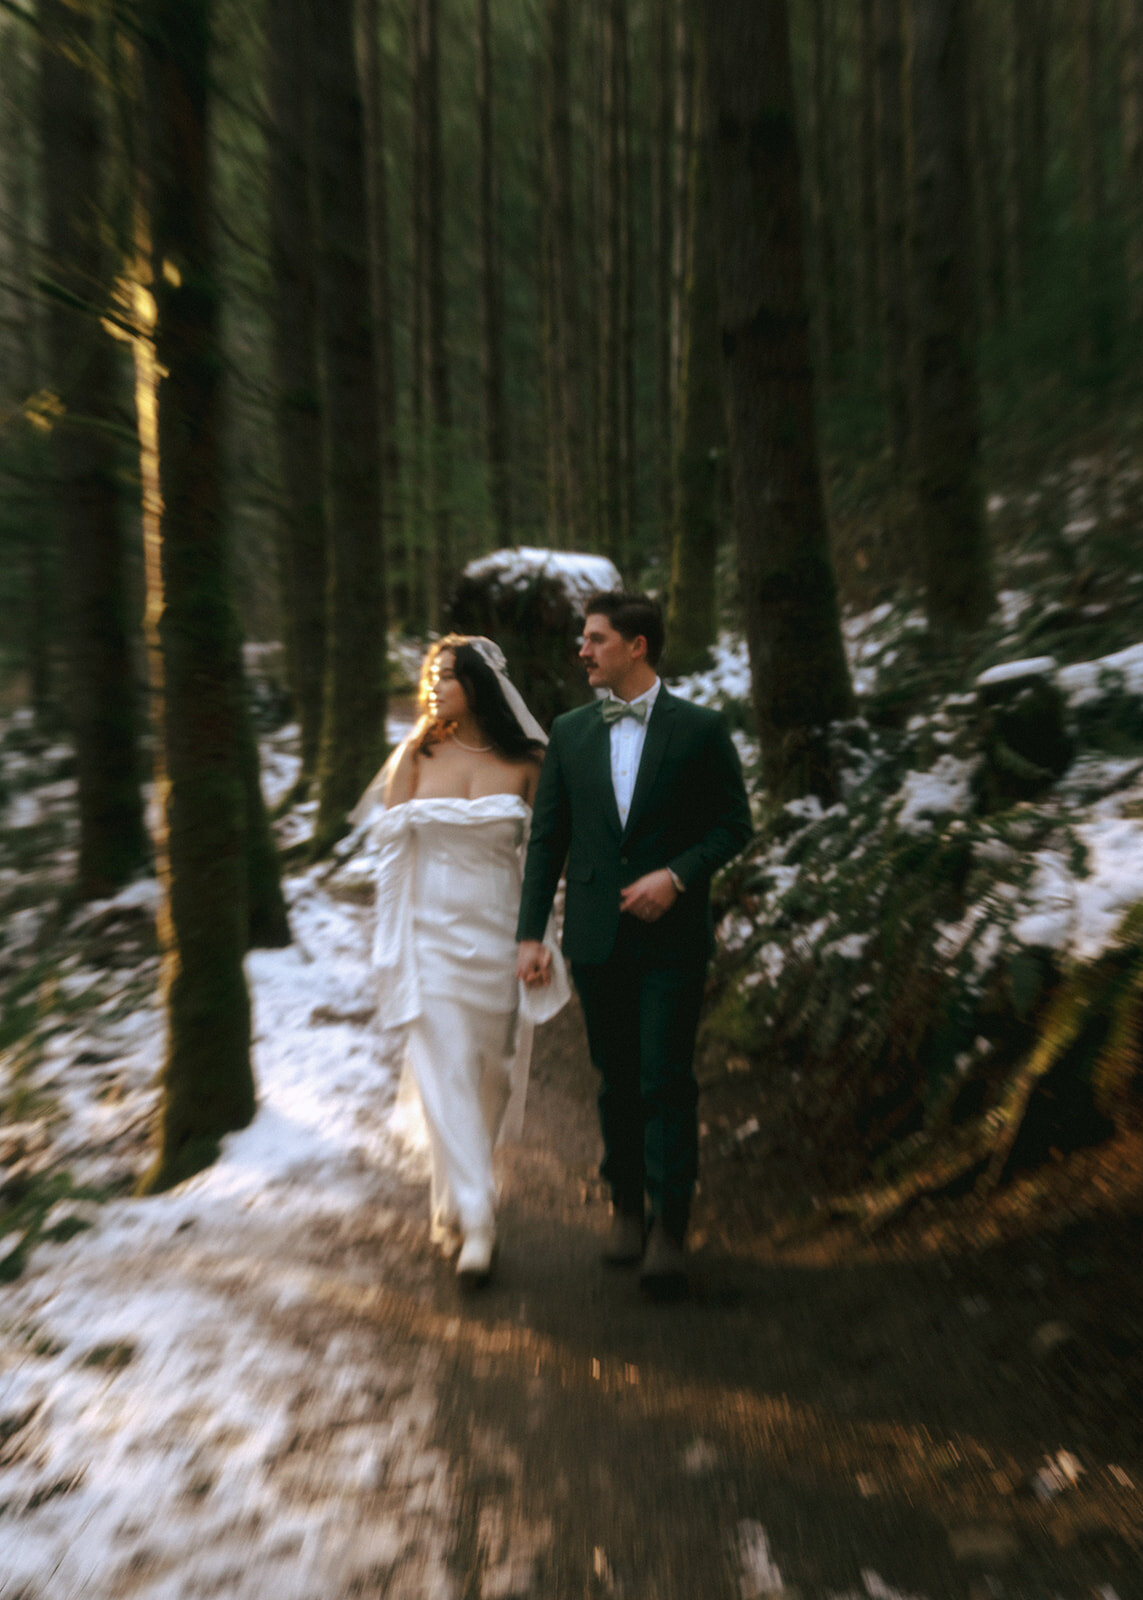 bc-vancouver-island-elopement-photographer-taylor-dawning-photography-forest-winter-boho-vintage-elopement-photos-42